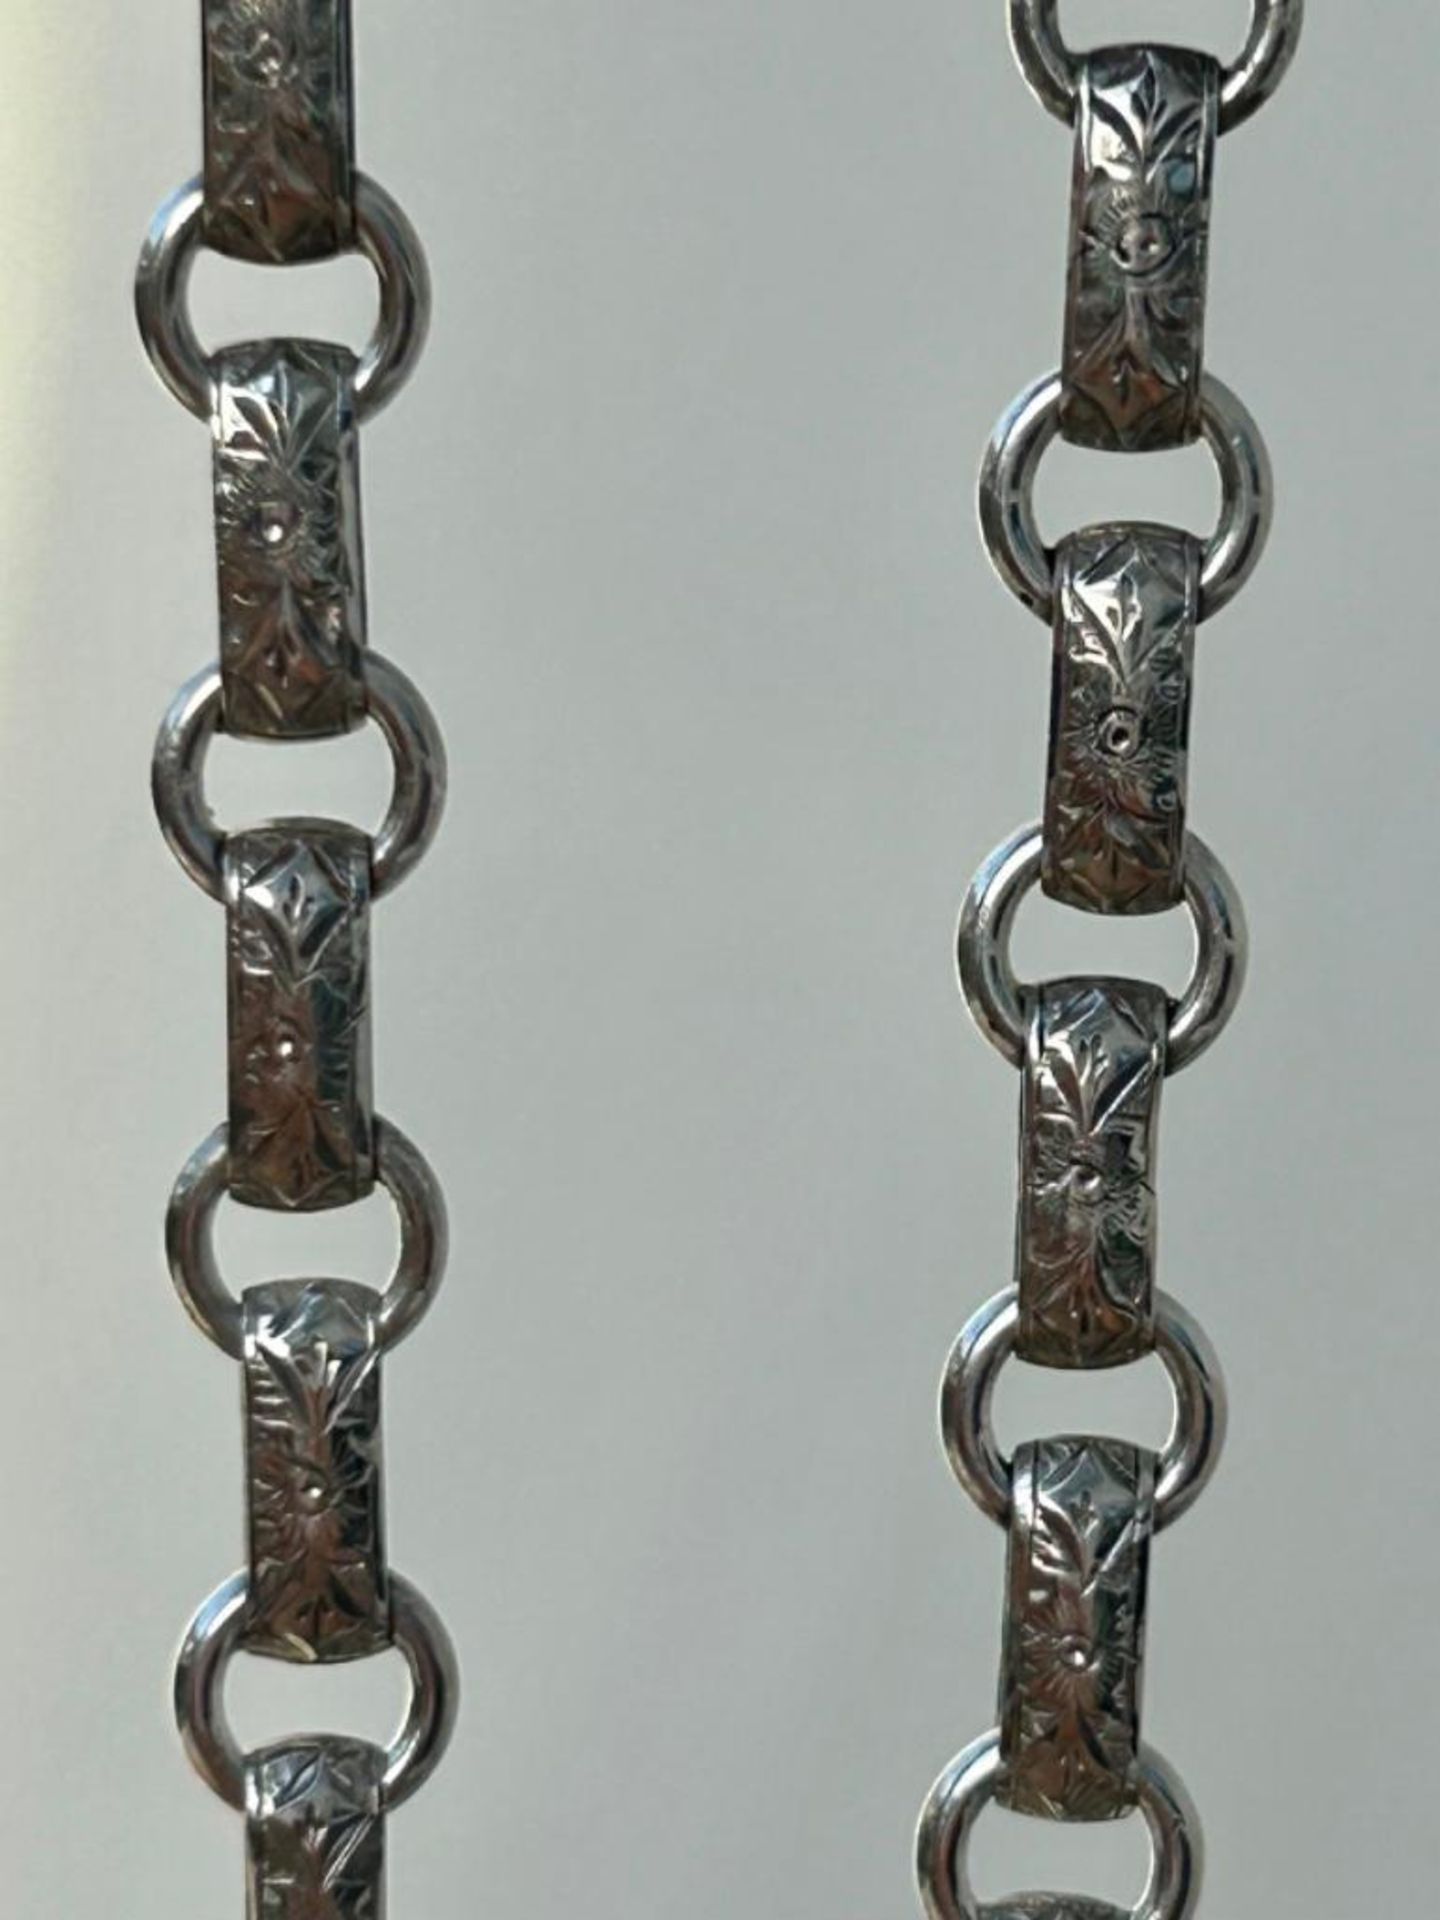 Antique Bookchain and Locket Pendant in Silver - Image 2 of 7